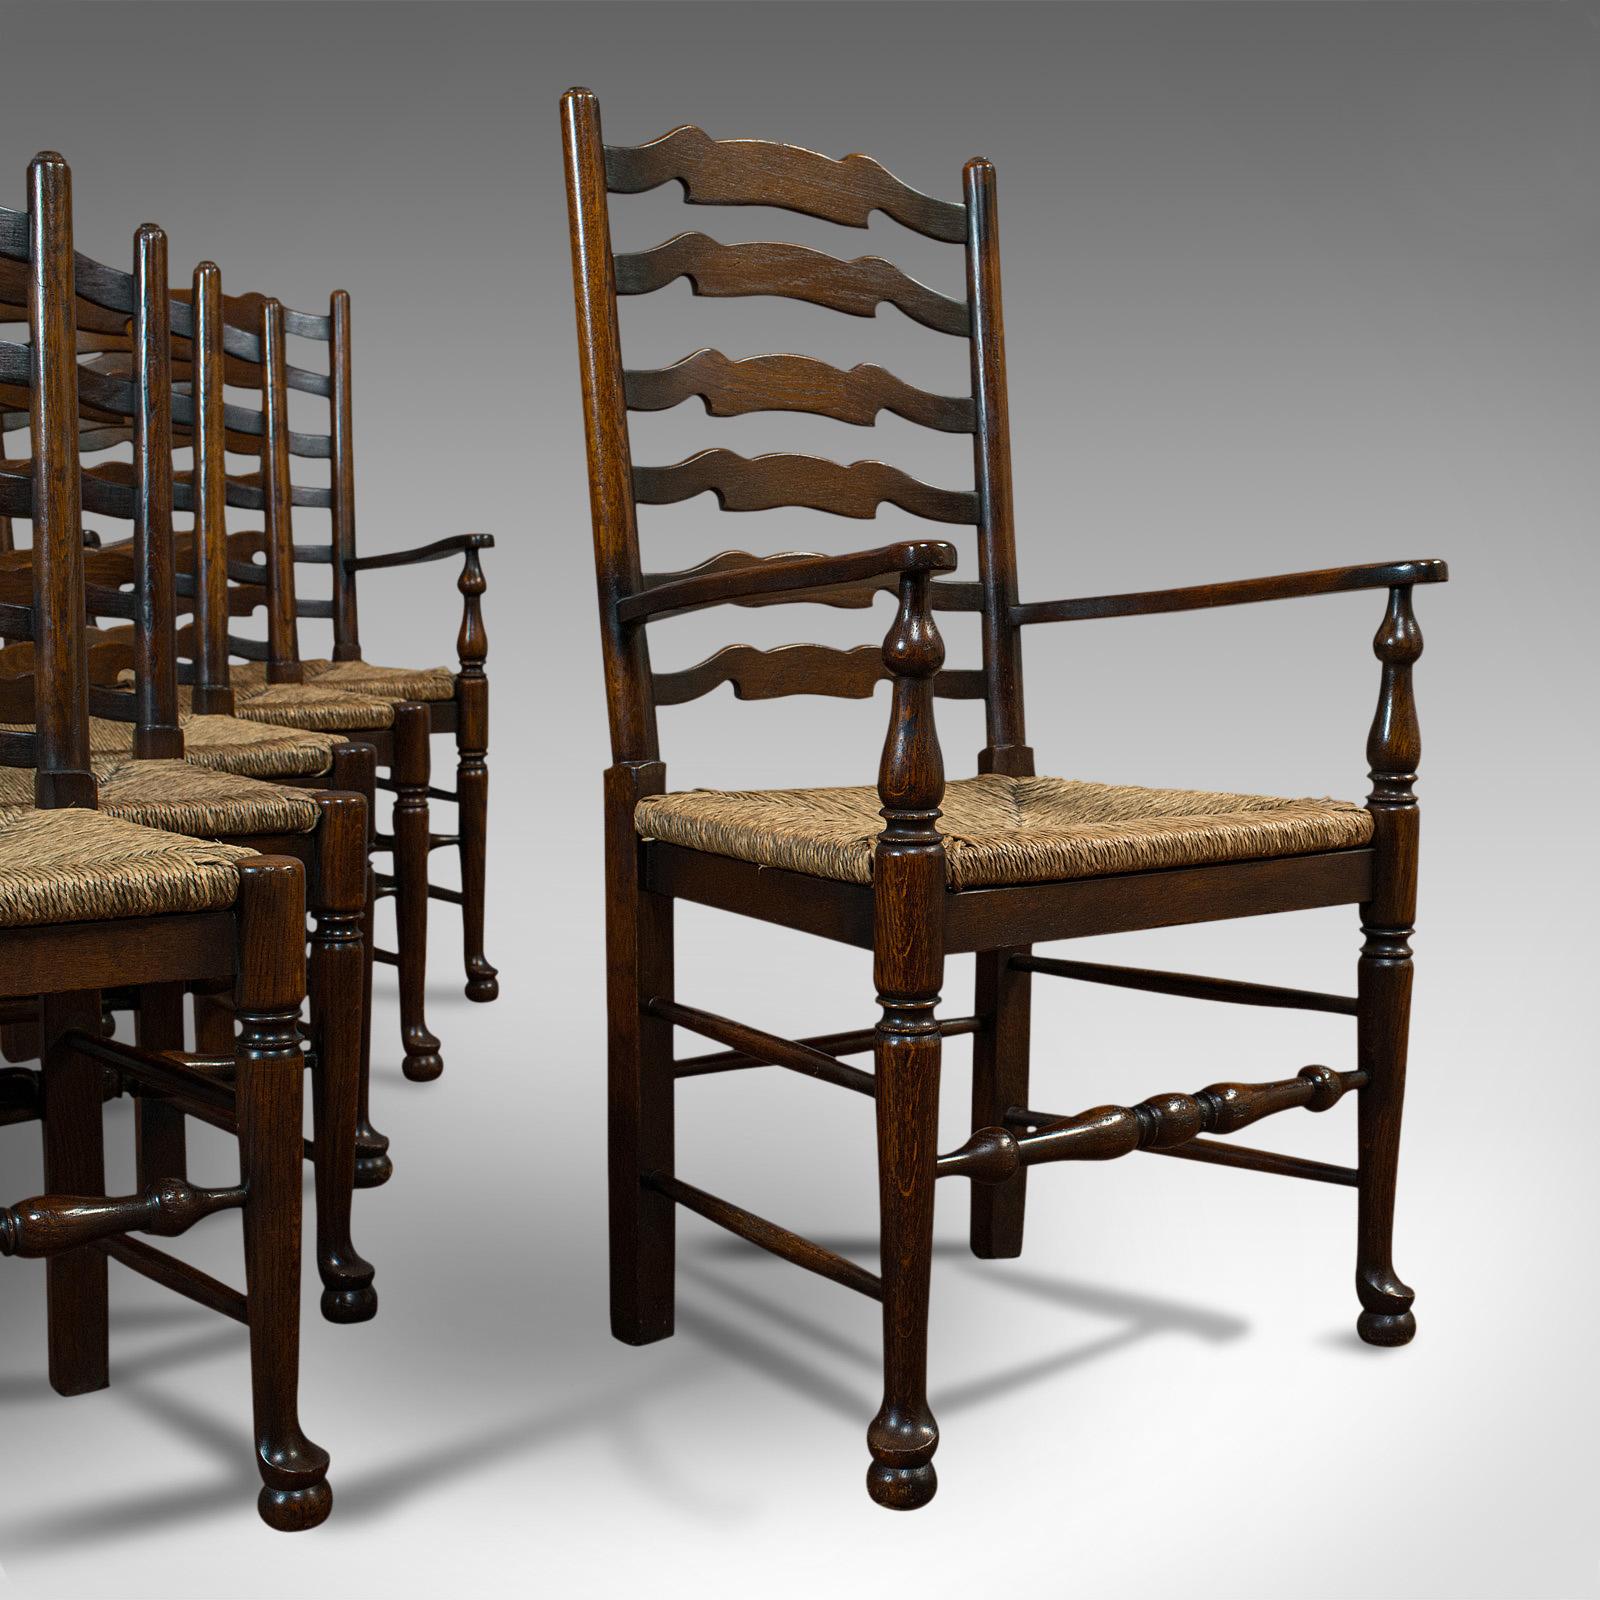 This is a set of six antique ladderback dining chairs. An English, oak rush seat set with pair of carver elbow chairs, dating to the Edwardian period, circa 1910.

Set has four standards and a pair of carver elbow chairs
Good quality in English